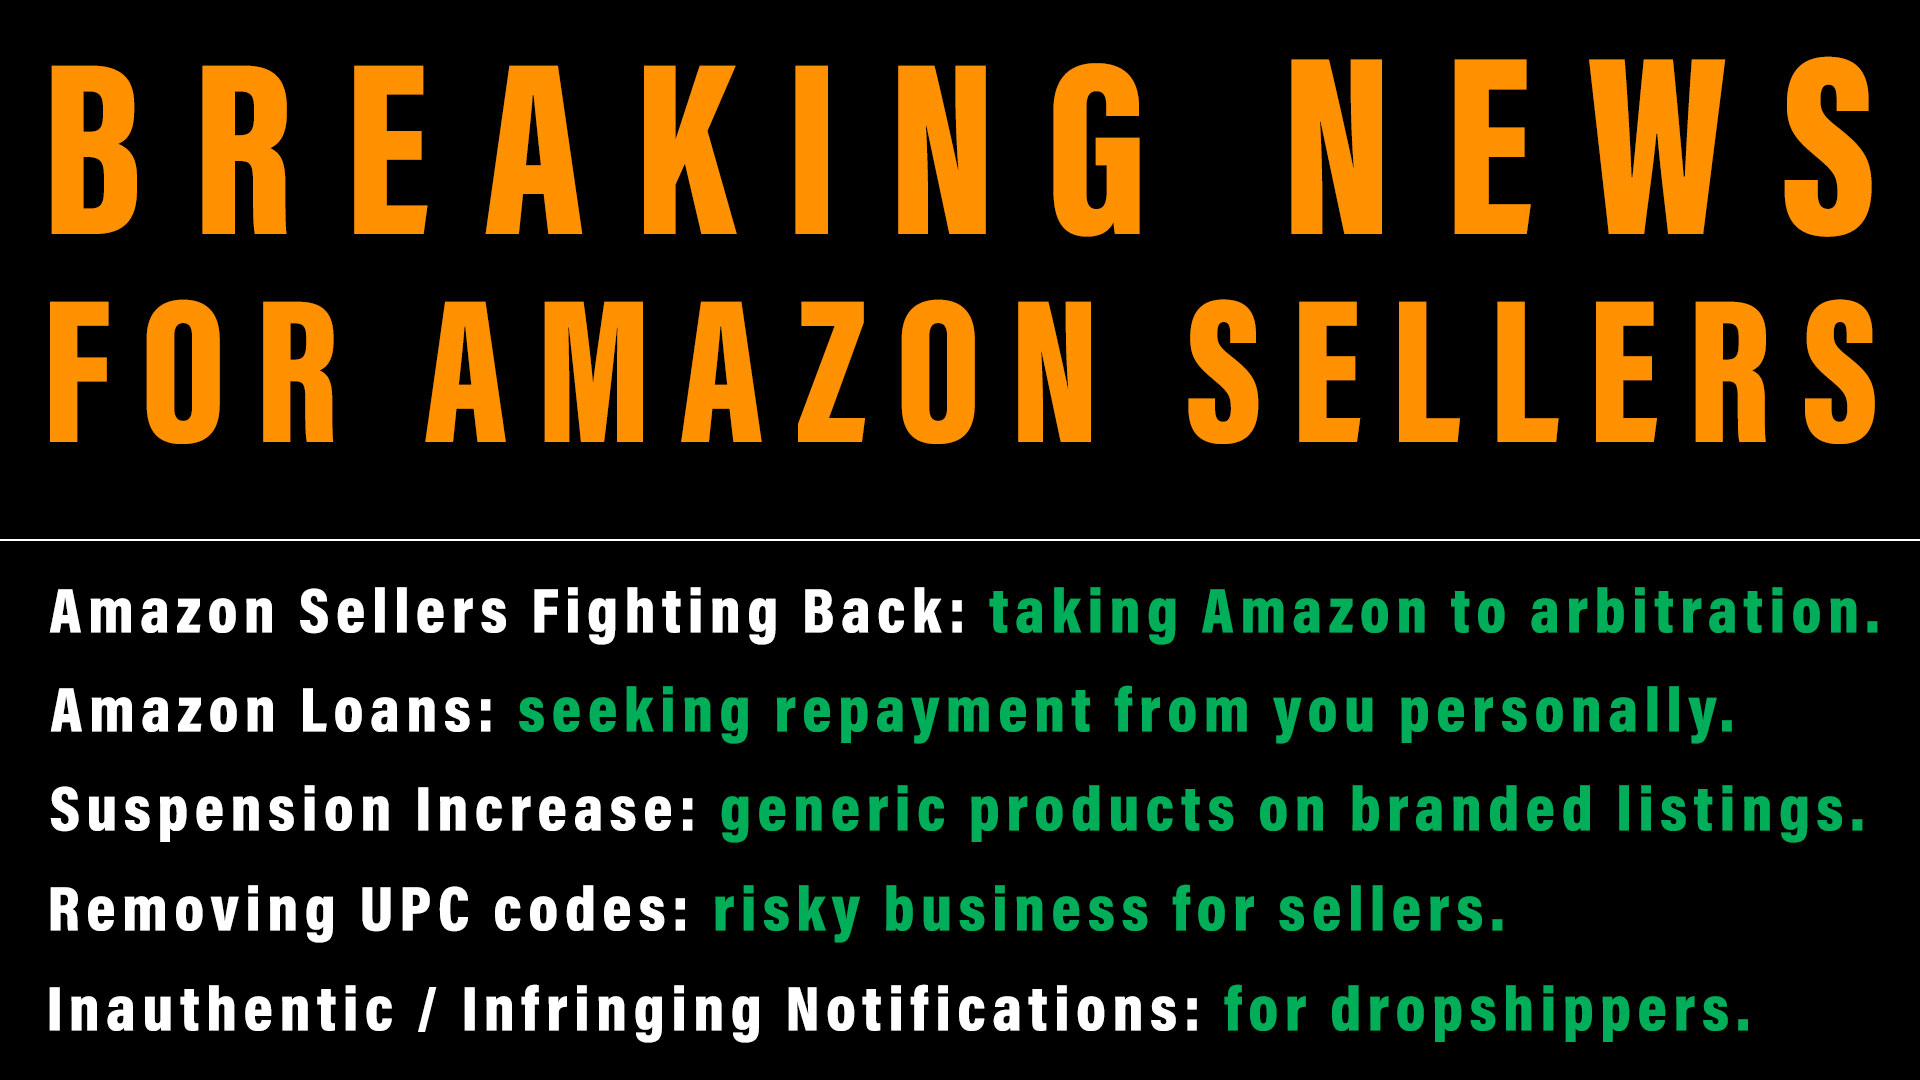 News for Amazon Sellers arbitration, loans, generic products, removing UPCs